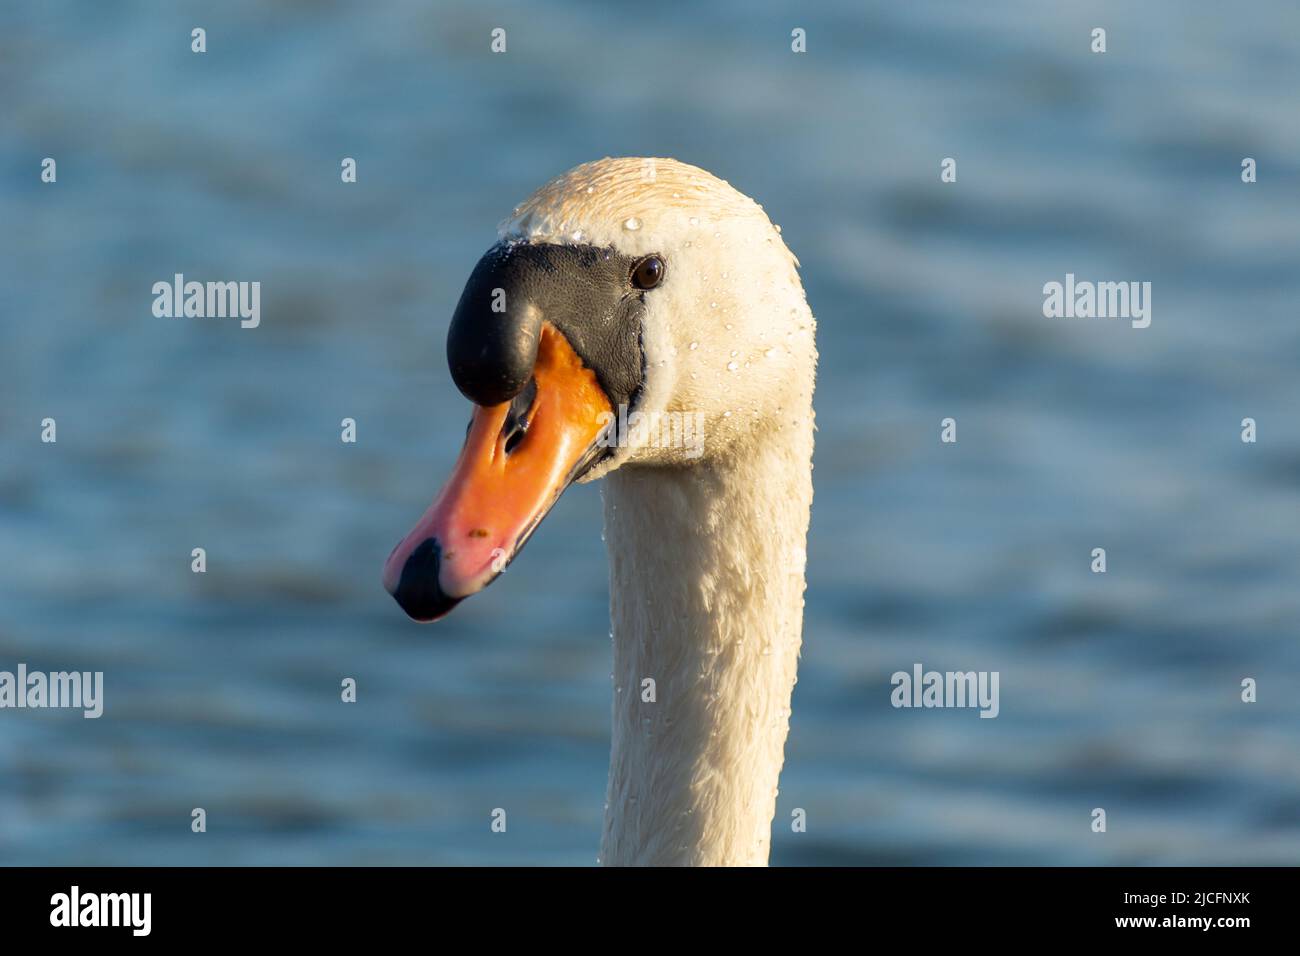 Close-up of the head and neck of a white swan, bird portrait Stock Photo